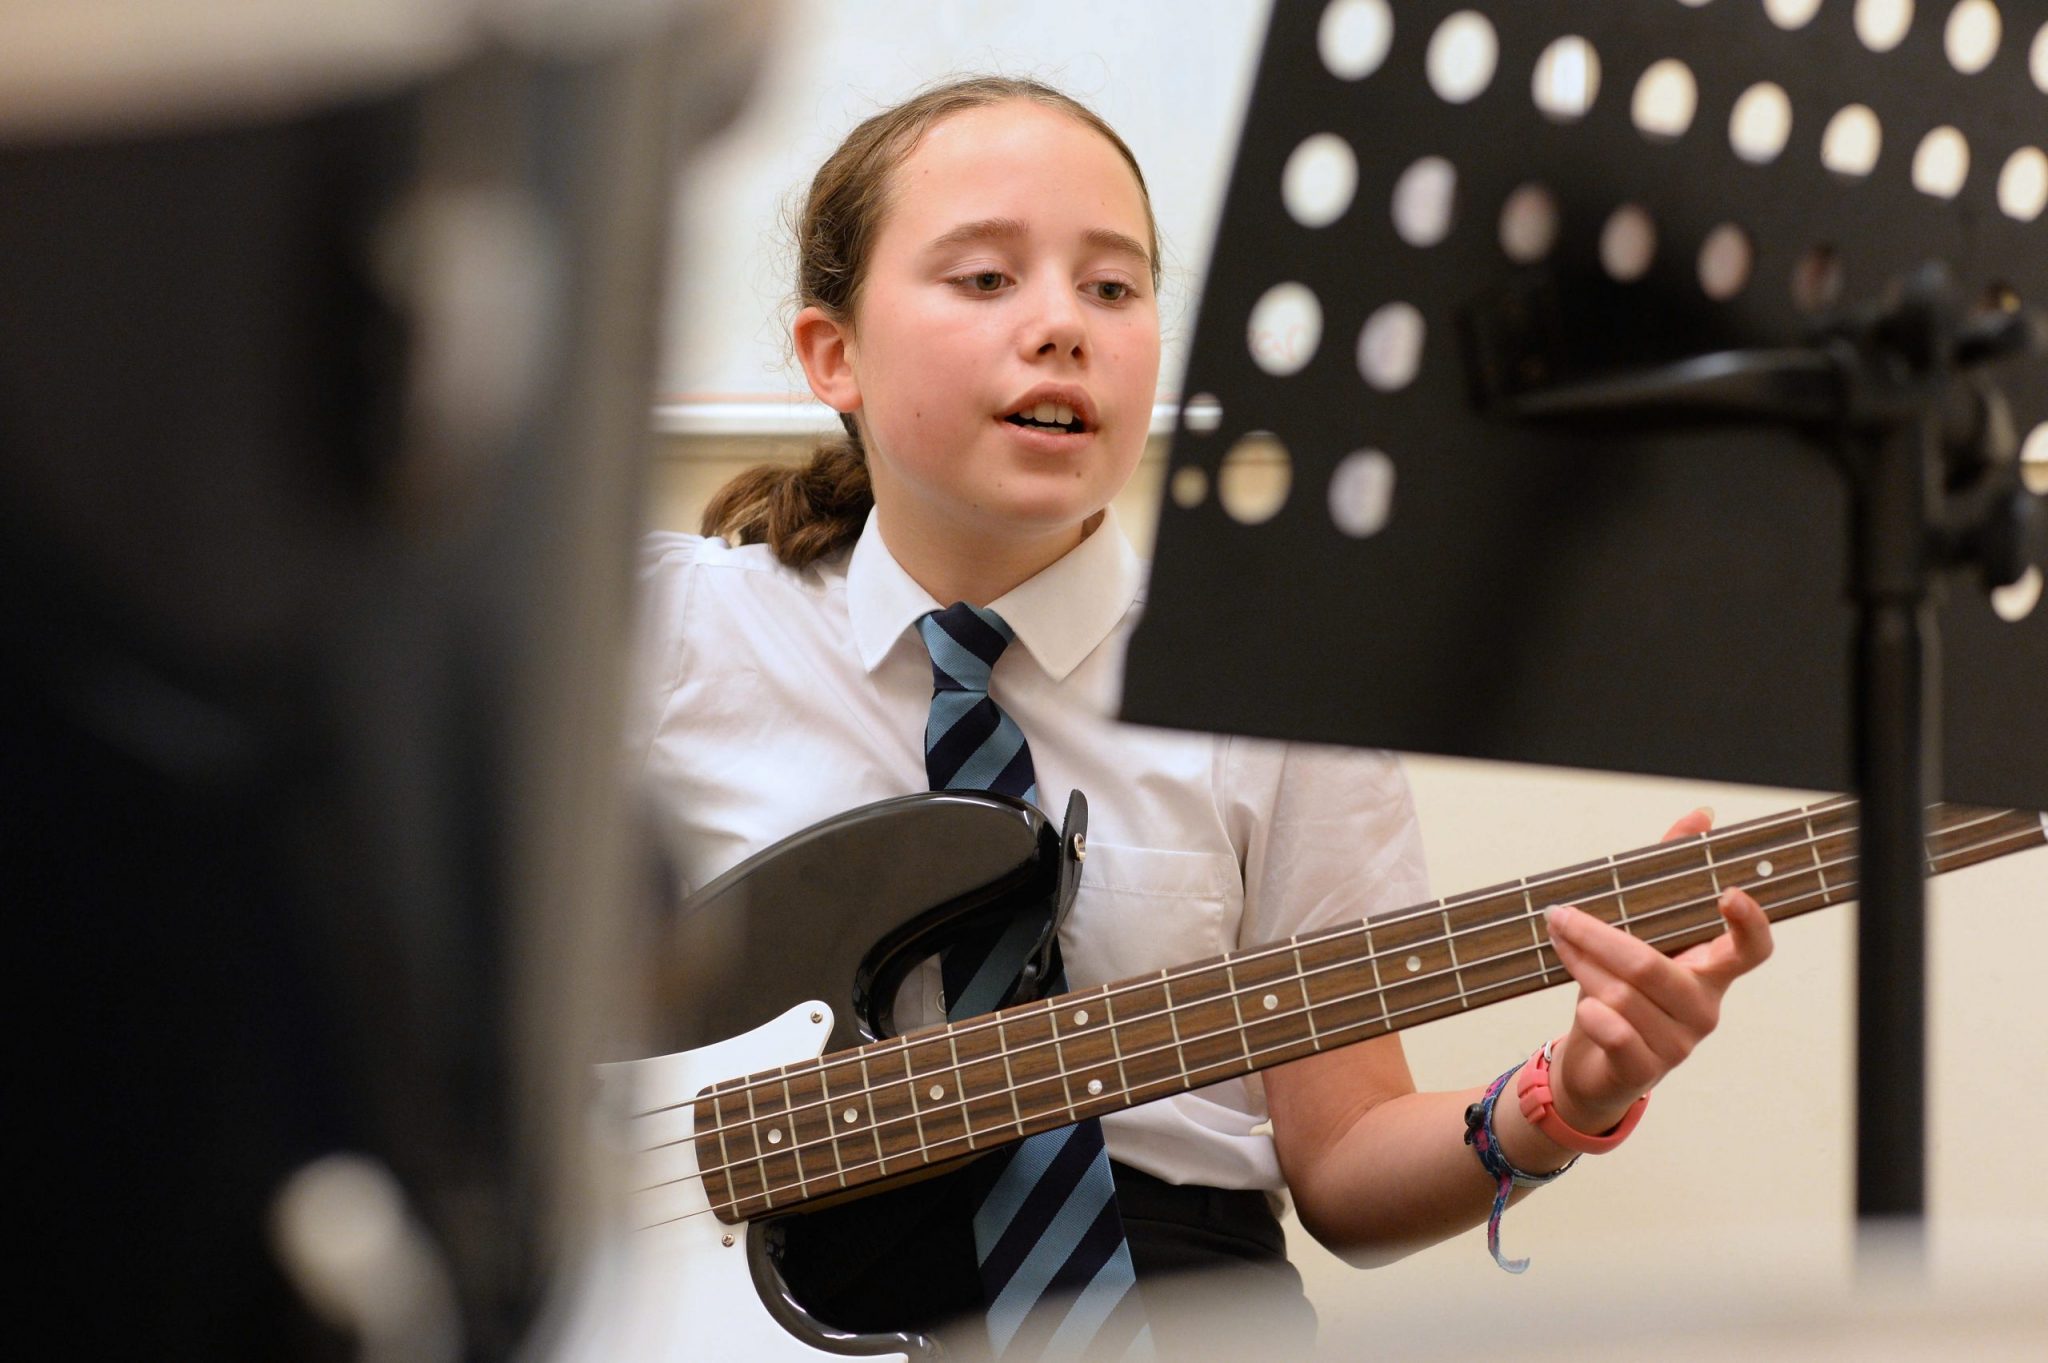 A young girl is playing bass guitar whilst singing from a sheet on a music stand in front of her